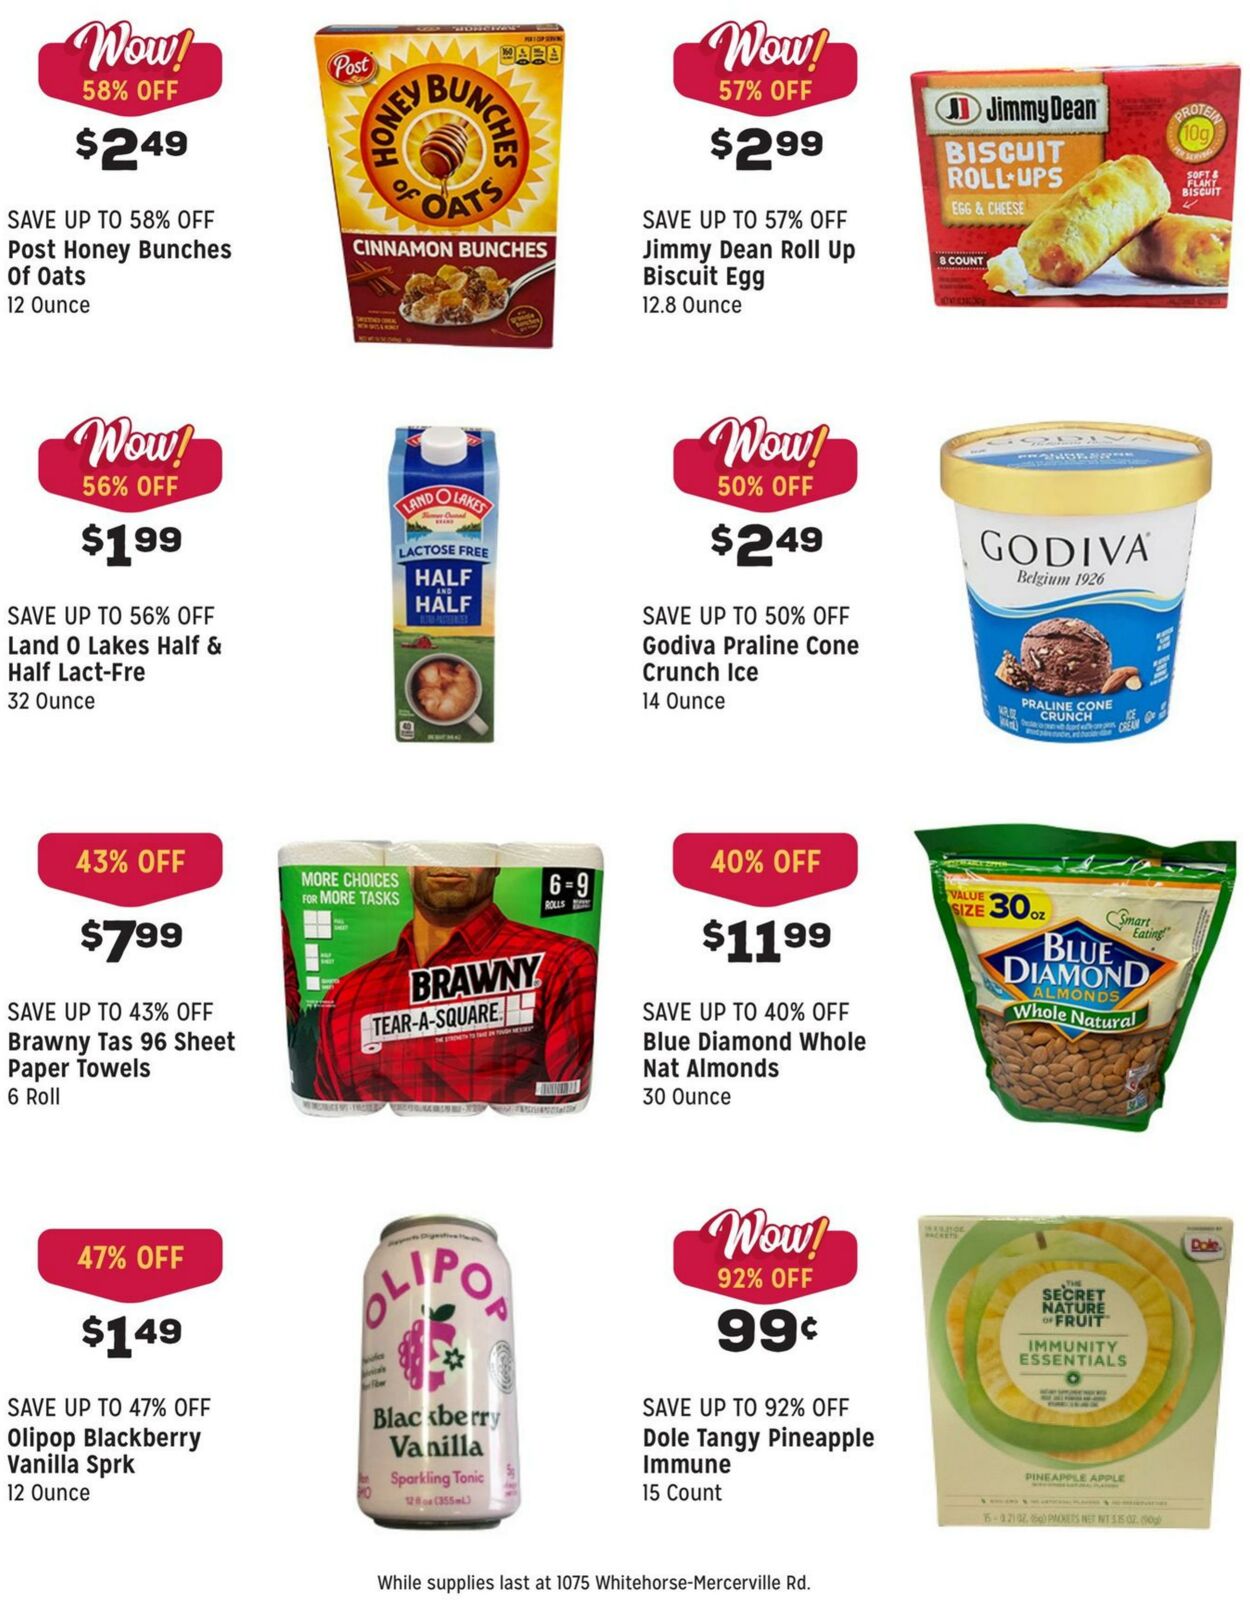 Weekly ad Grocery Outlet 12/21/2022 - 12/27/2022